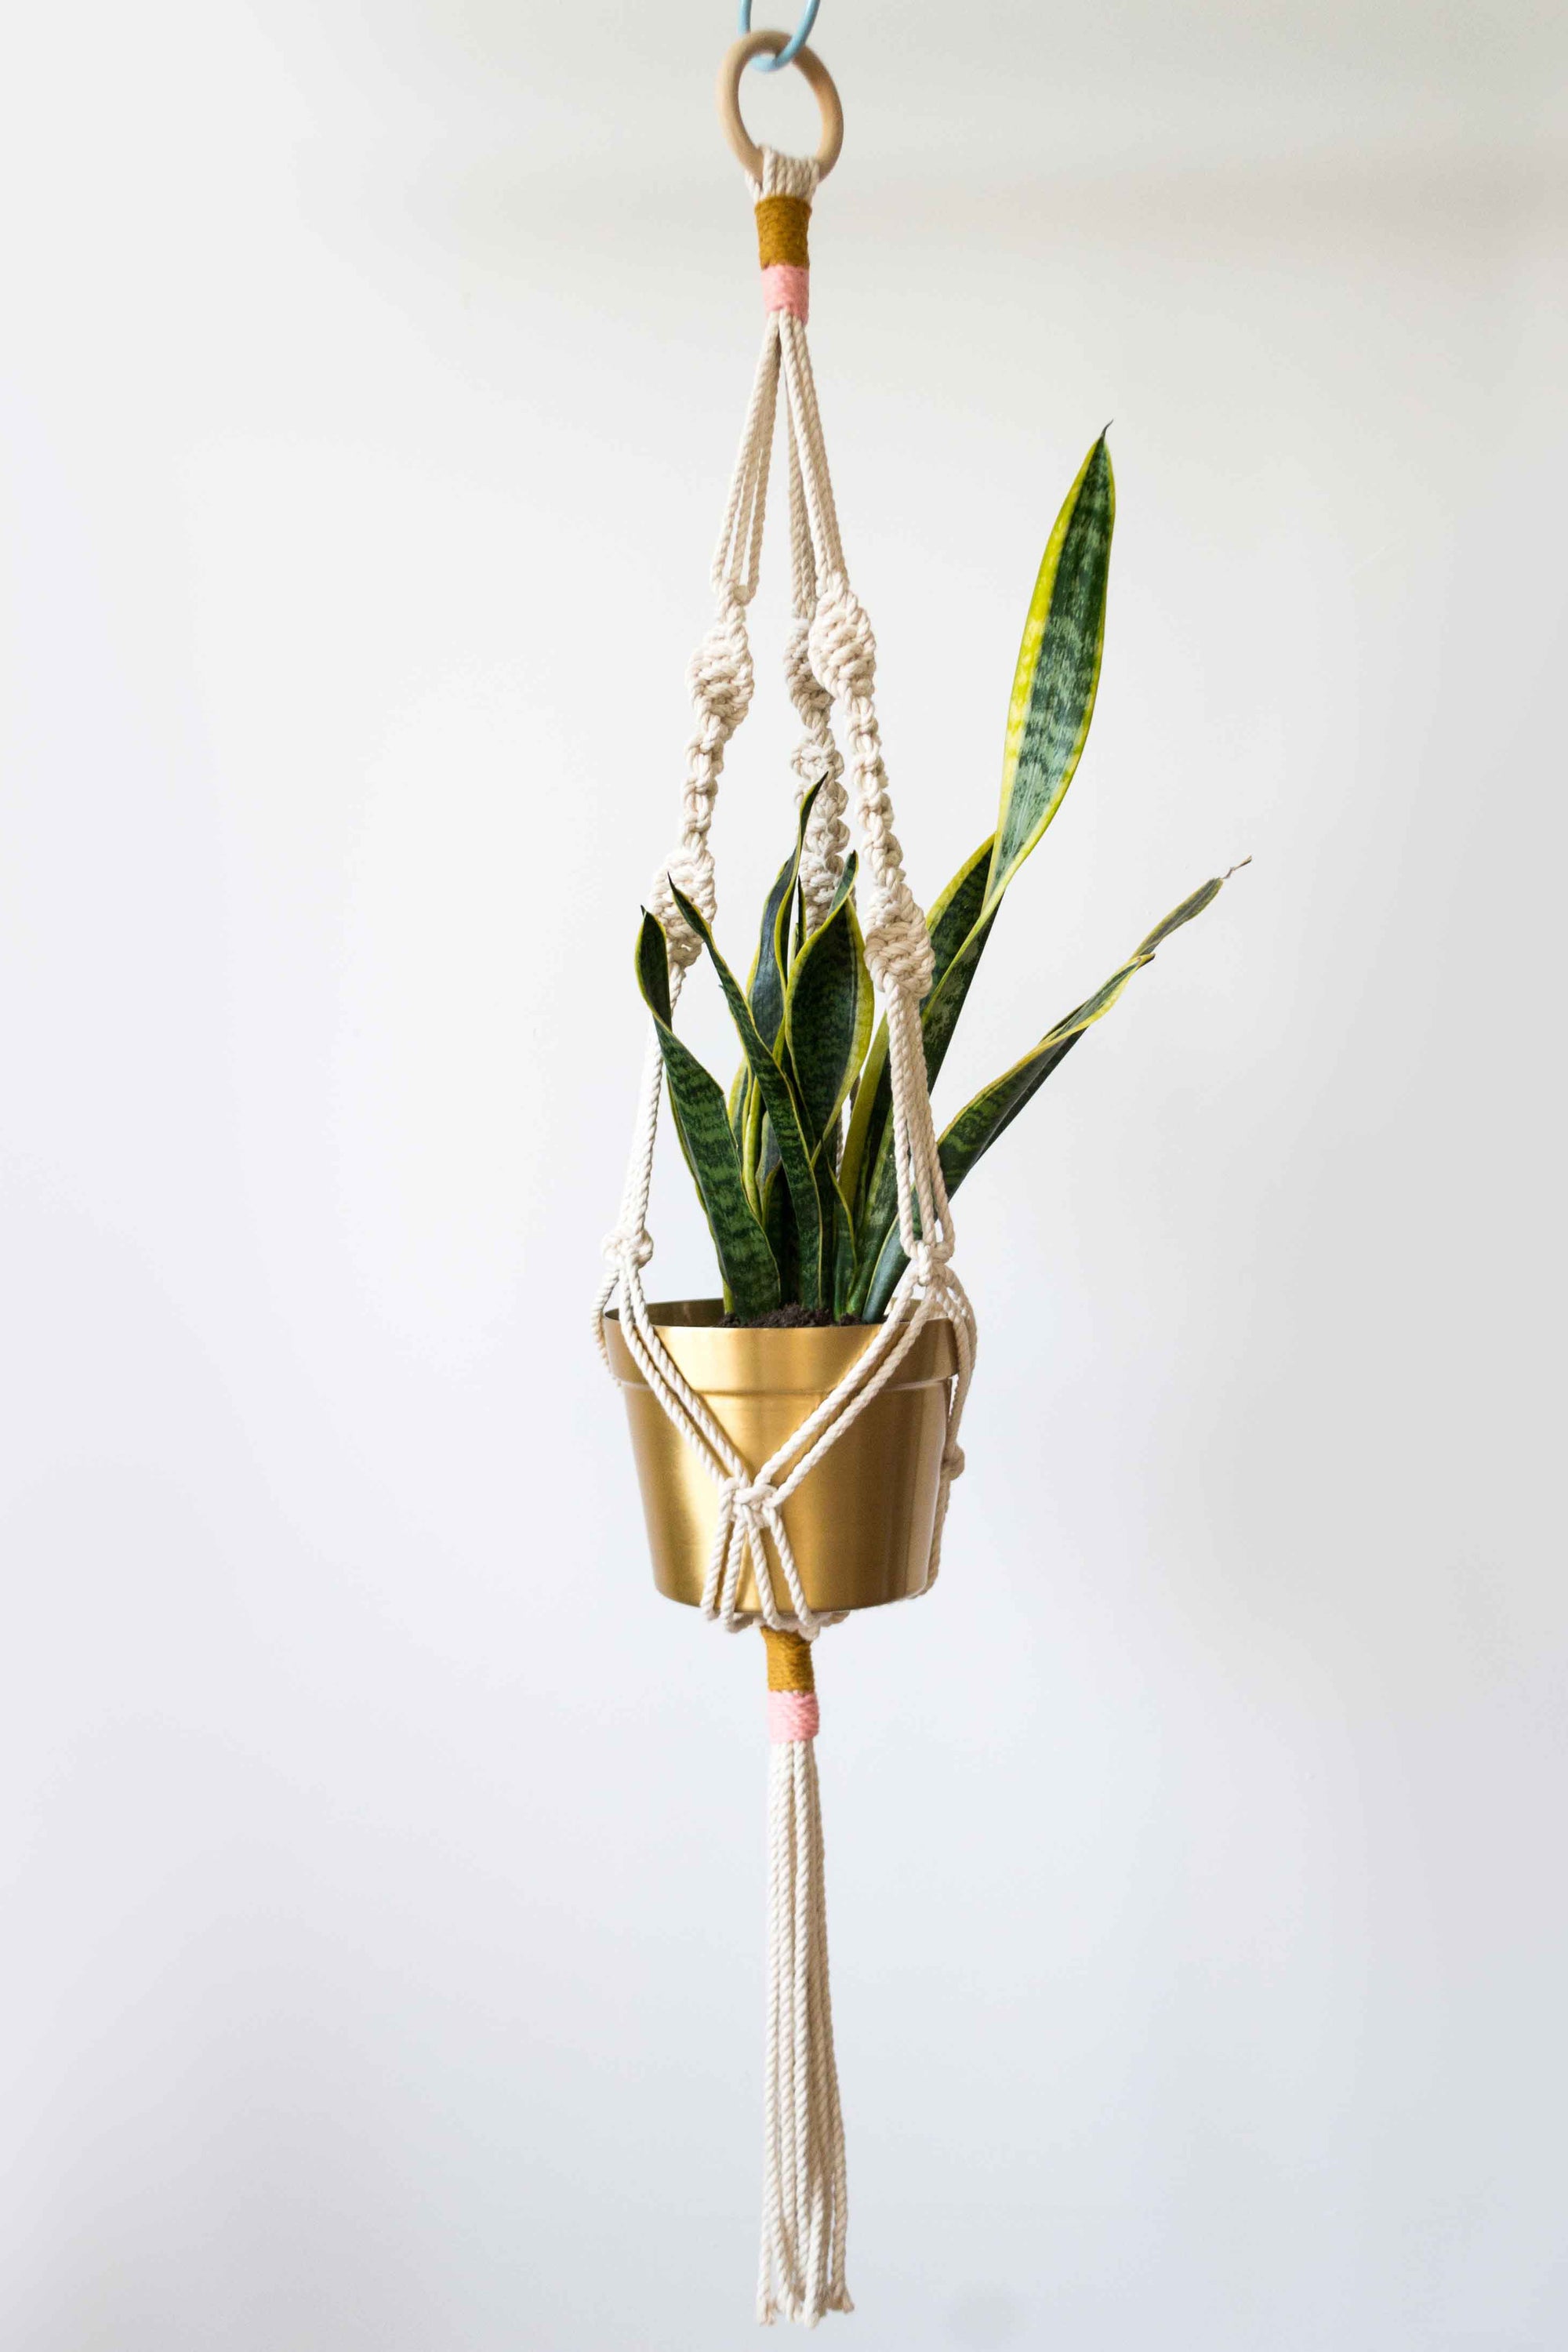 Materials of Macrame plant hanger 40" - Available in multiple color variations